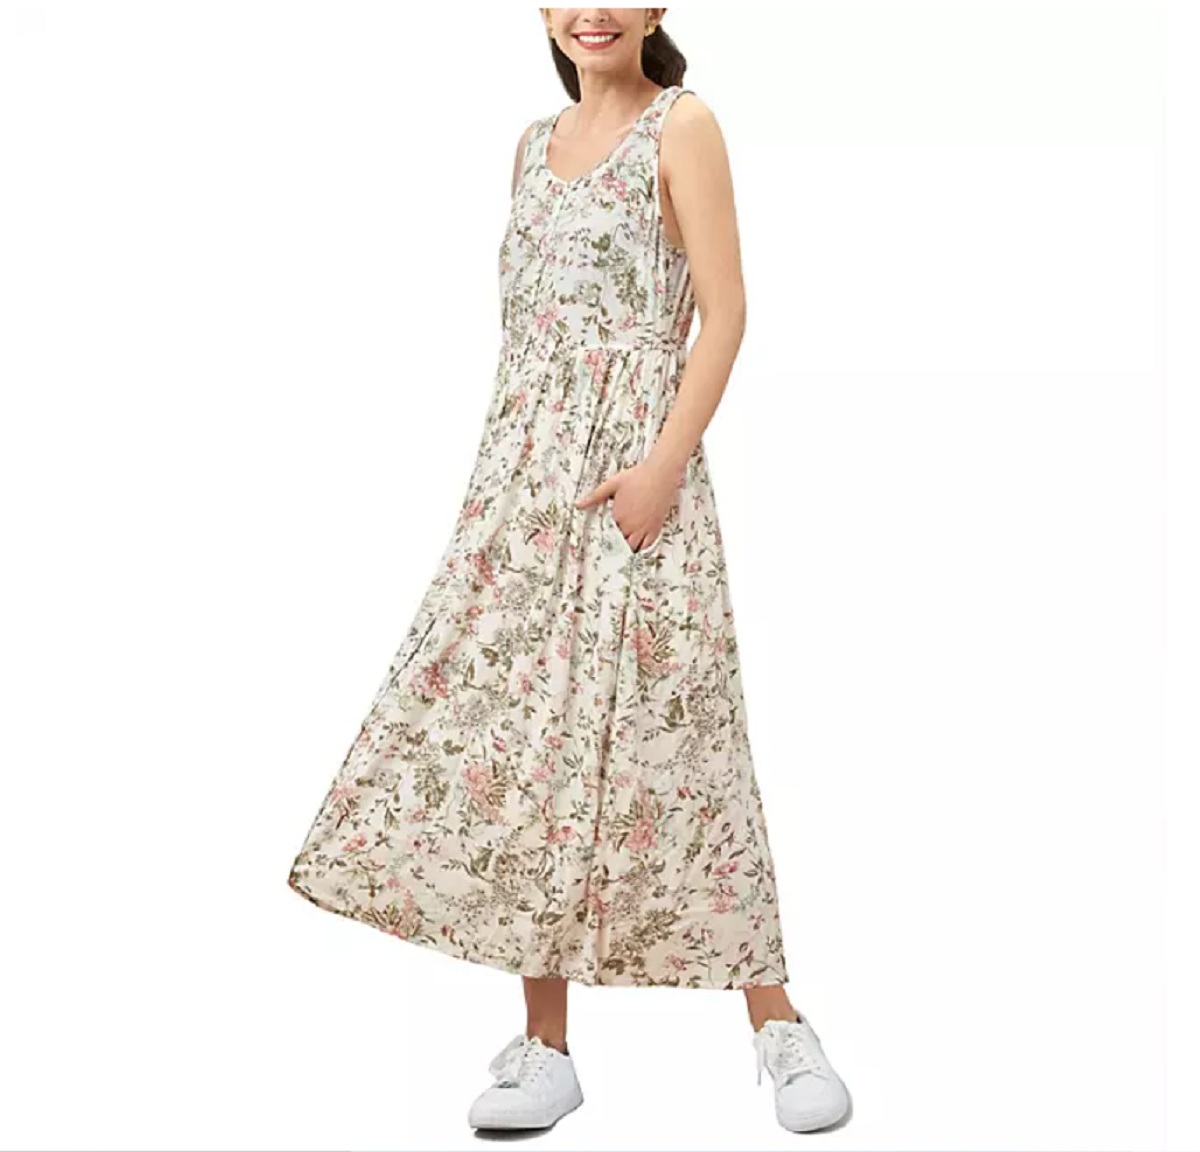 Frye Ladies Button Front Midi Dress, Gifts for Young Moms